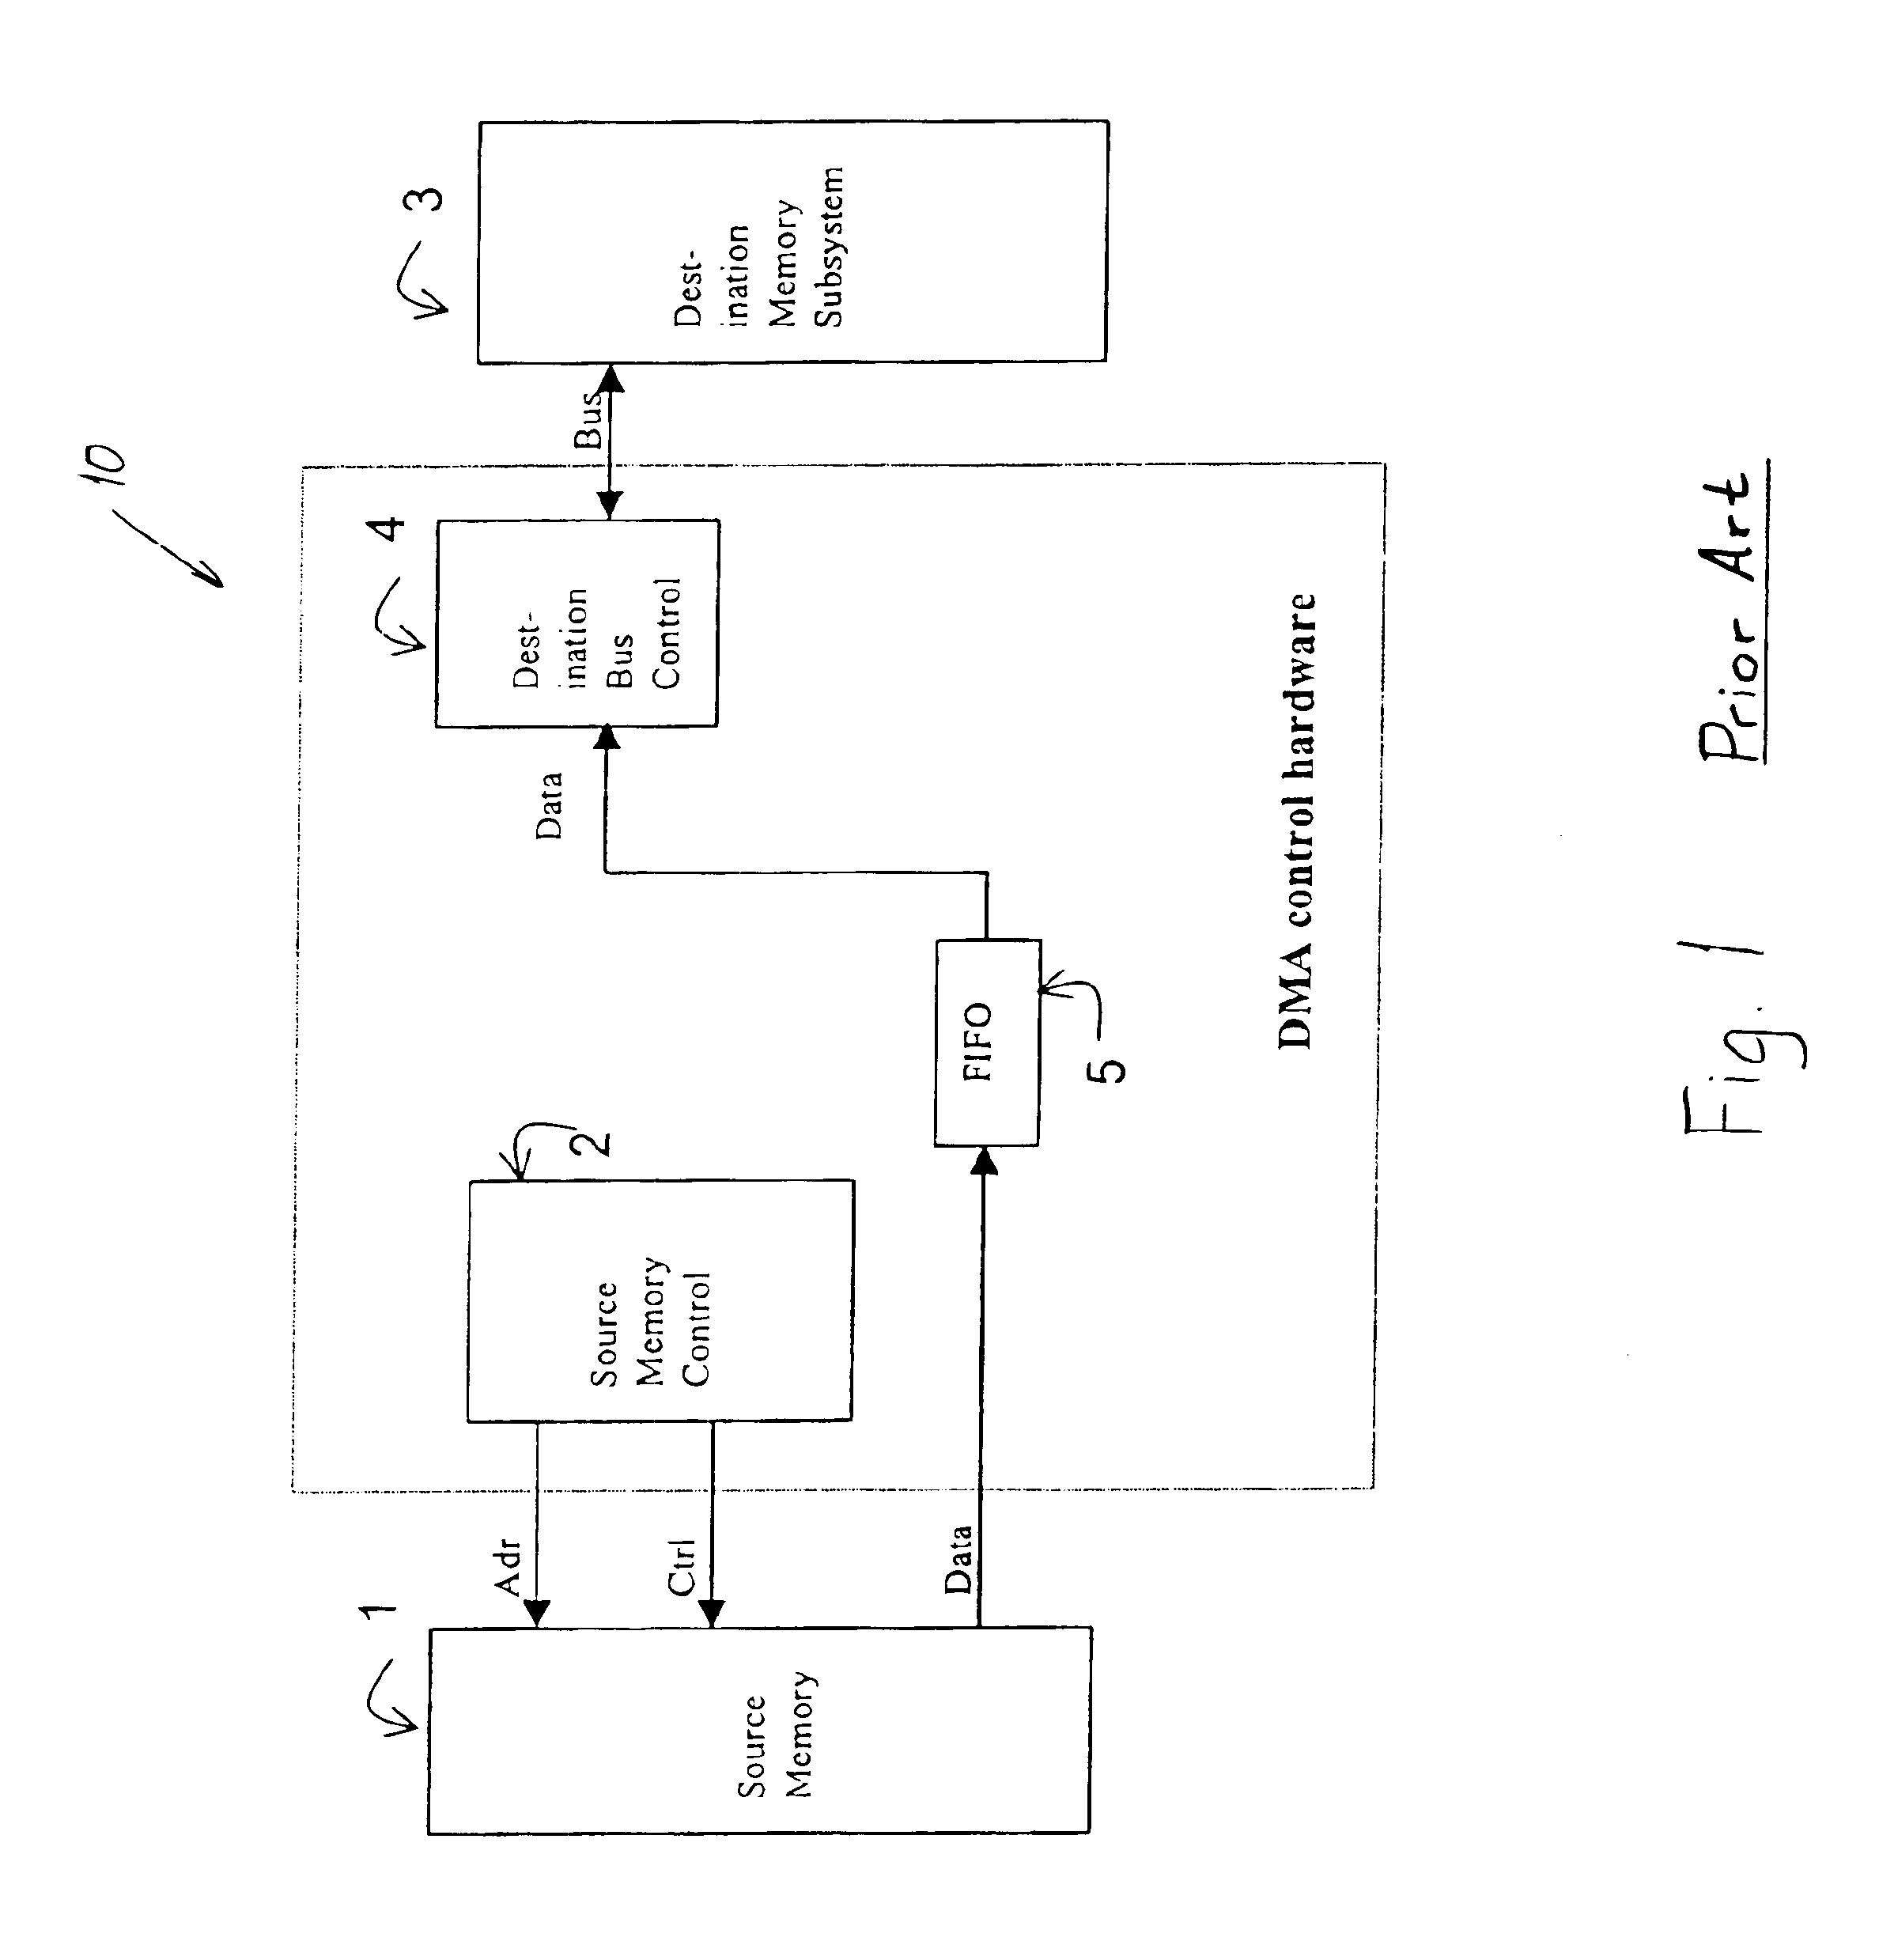 Direct memory access controller and method of filtering data during data transfer from a source memory to a destination memory